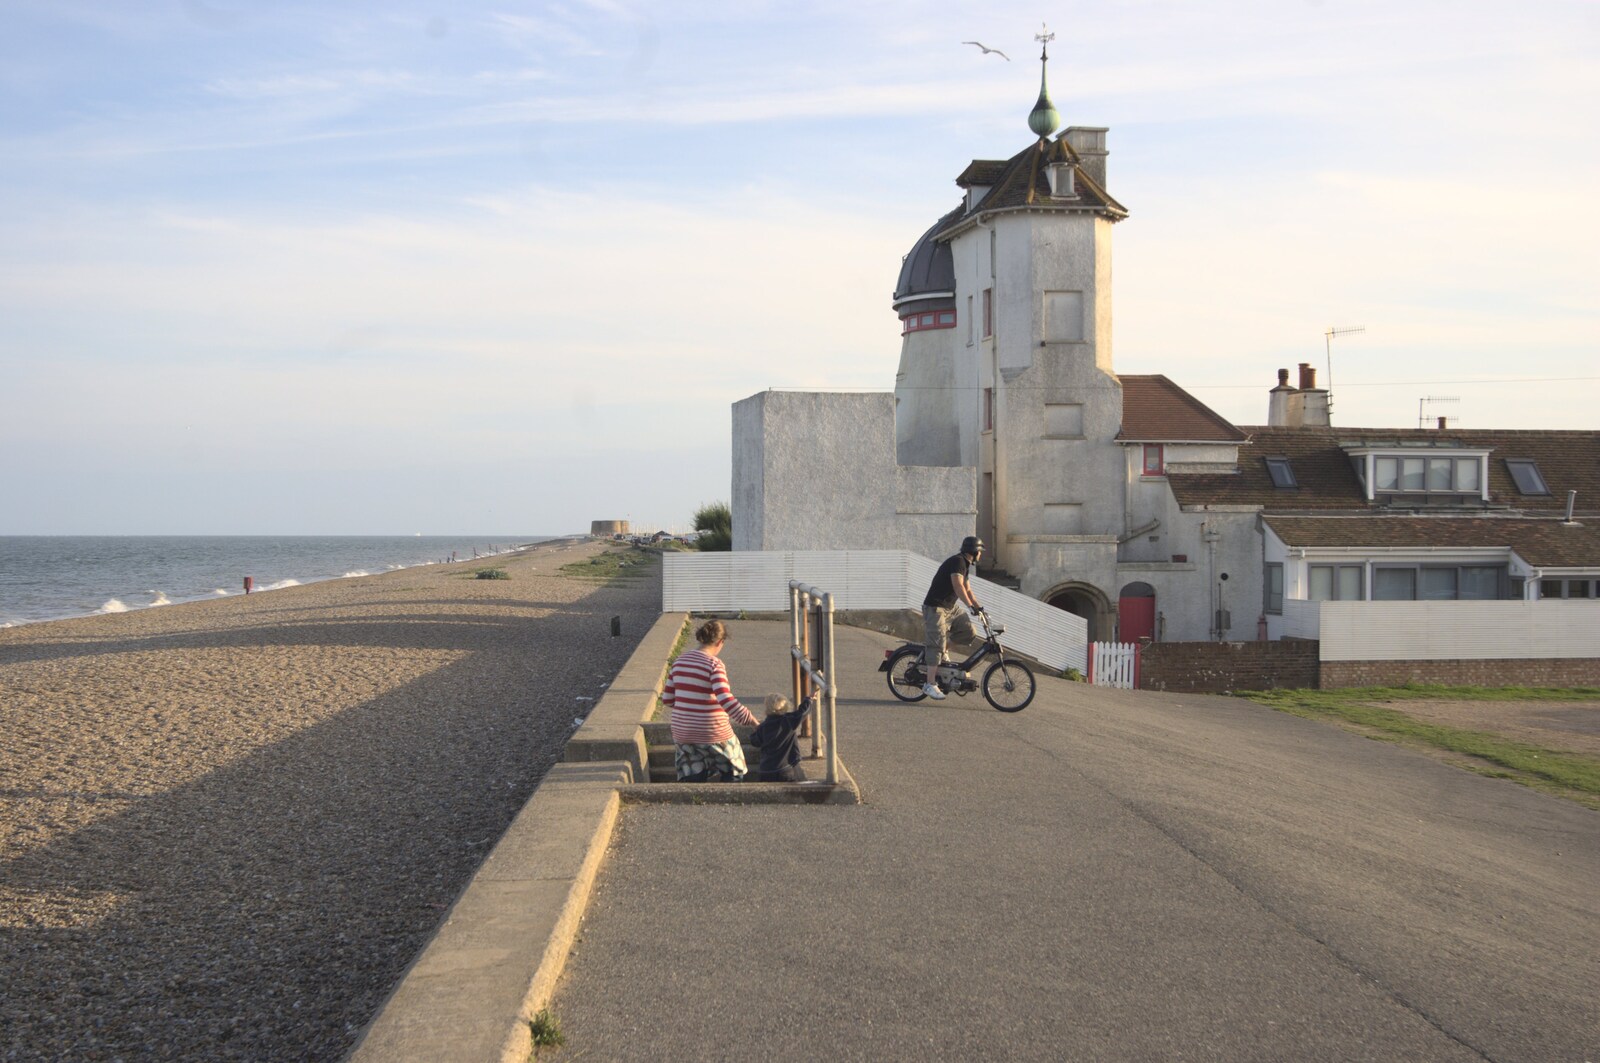 The BSCC at the Beaky, and The Campervan's First Trip, Dunwich and Aldeburgh, Suffolk - 8th August 2010: On the sea wall at Aldeburgh